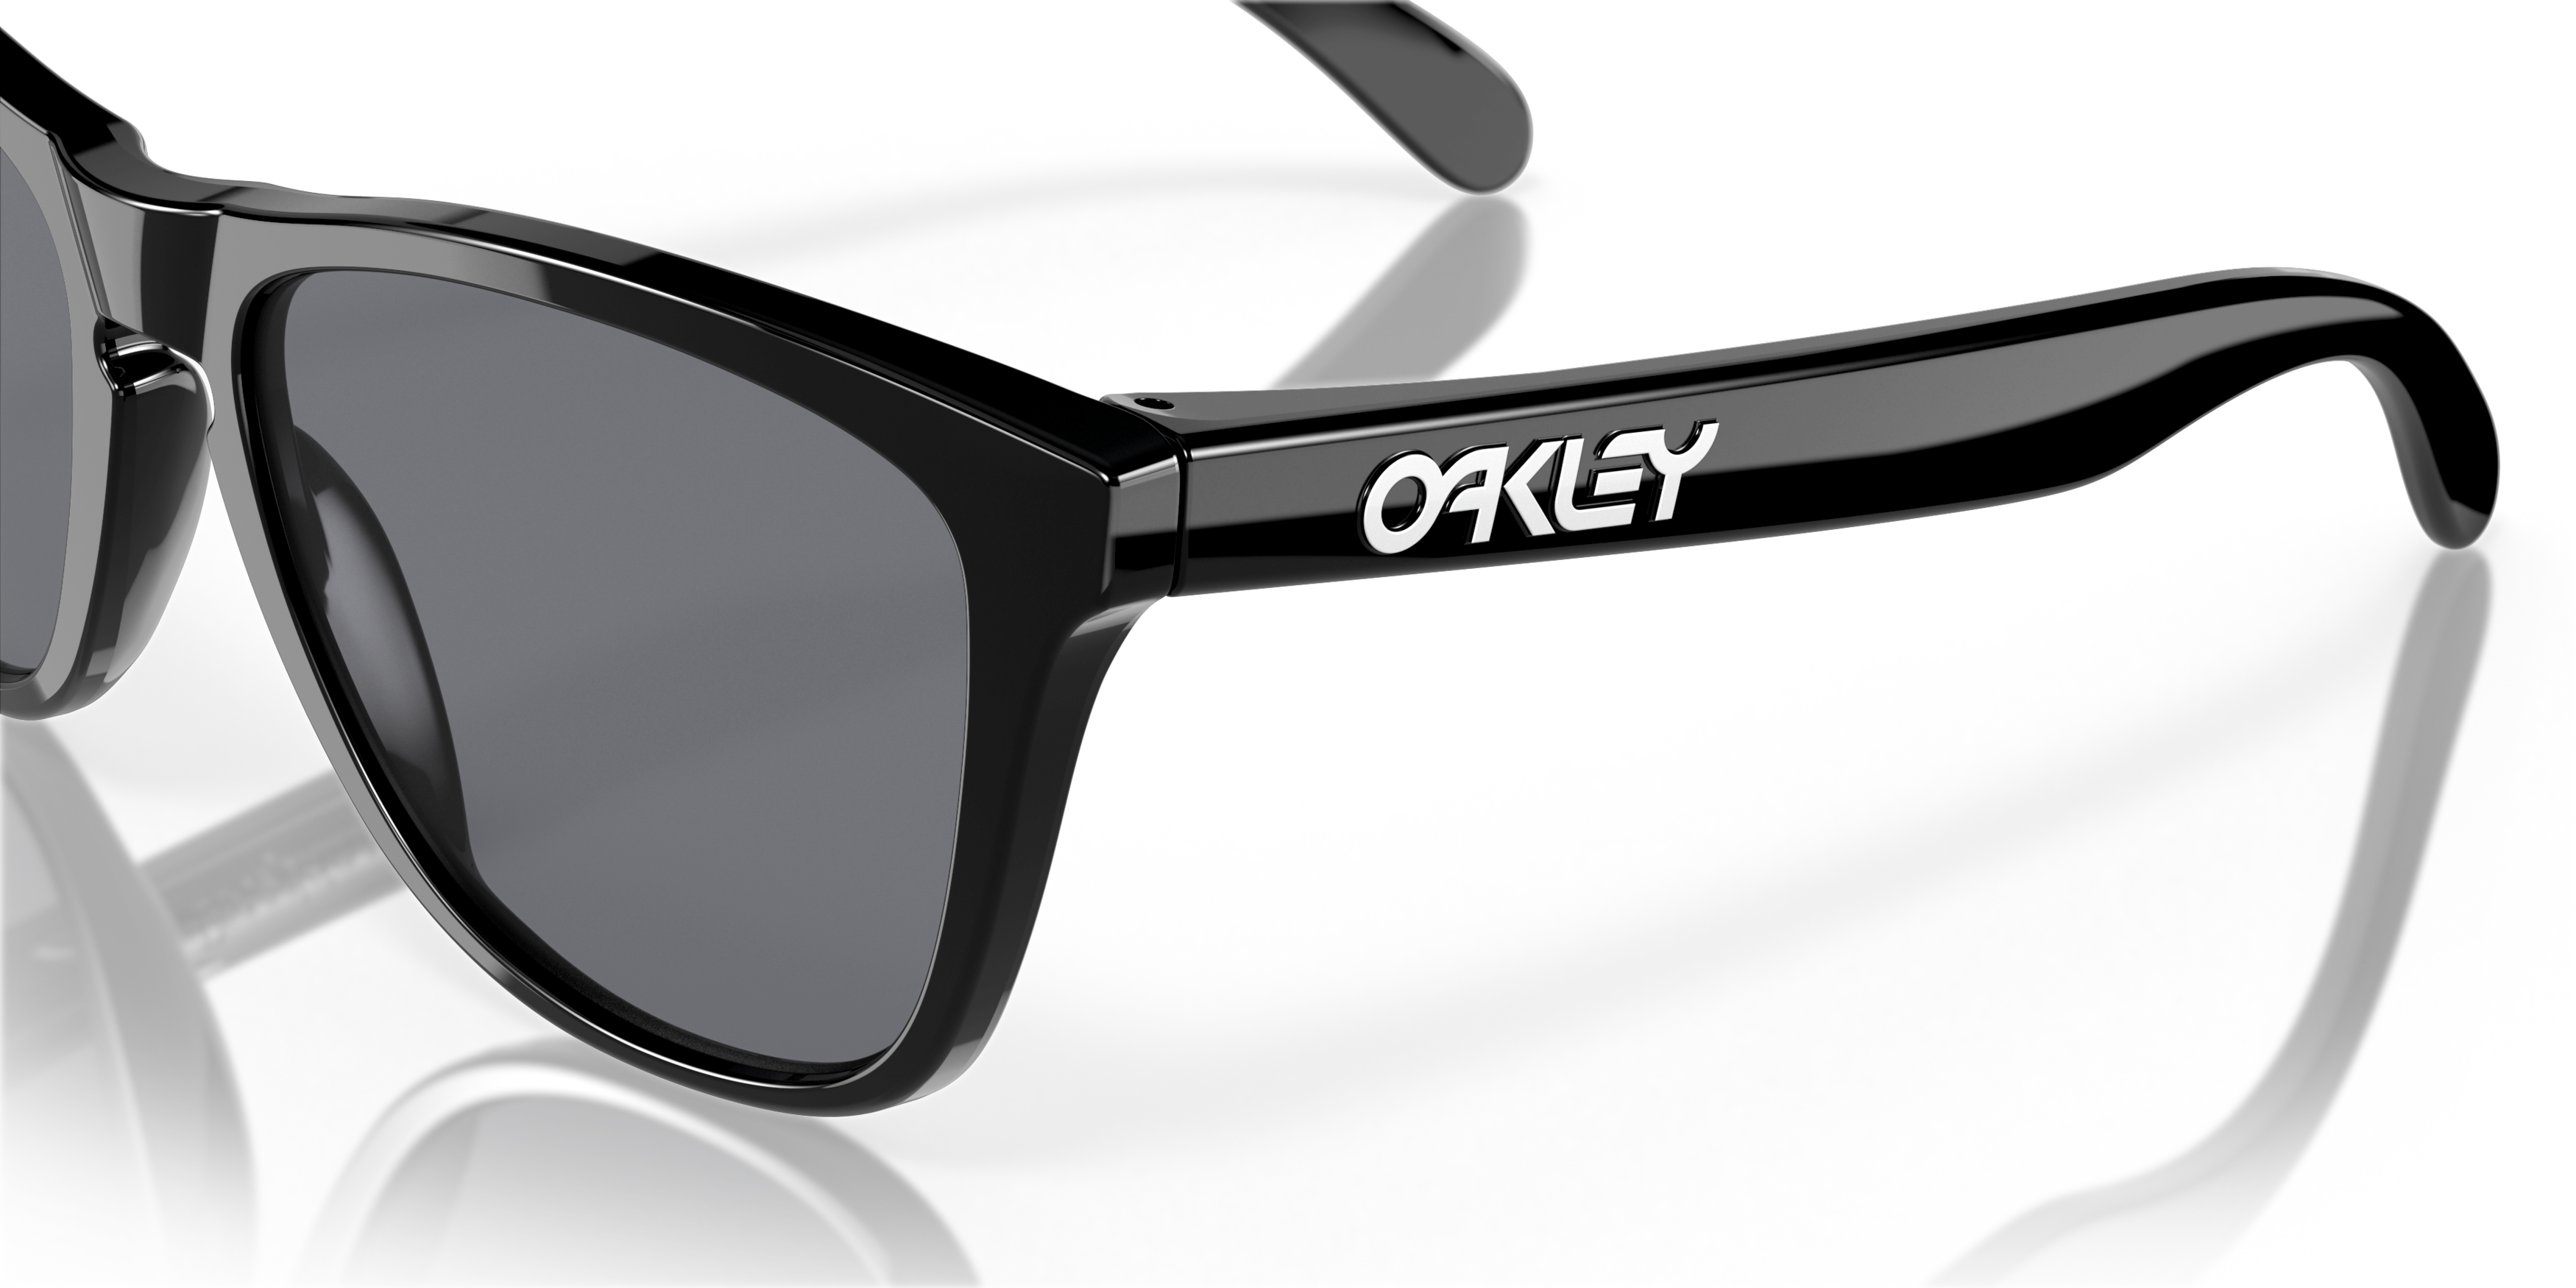 [products.image.detail01] Oakley